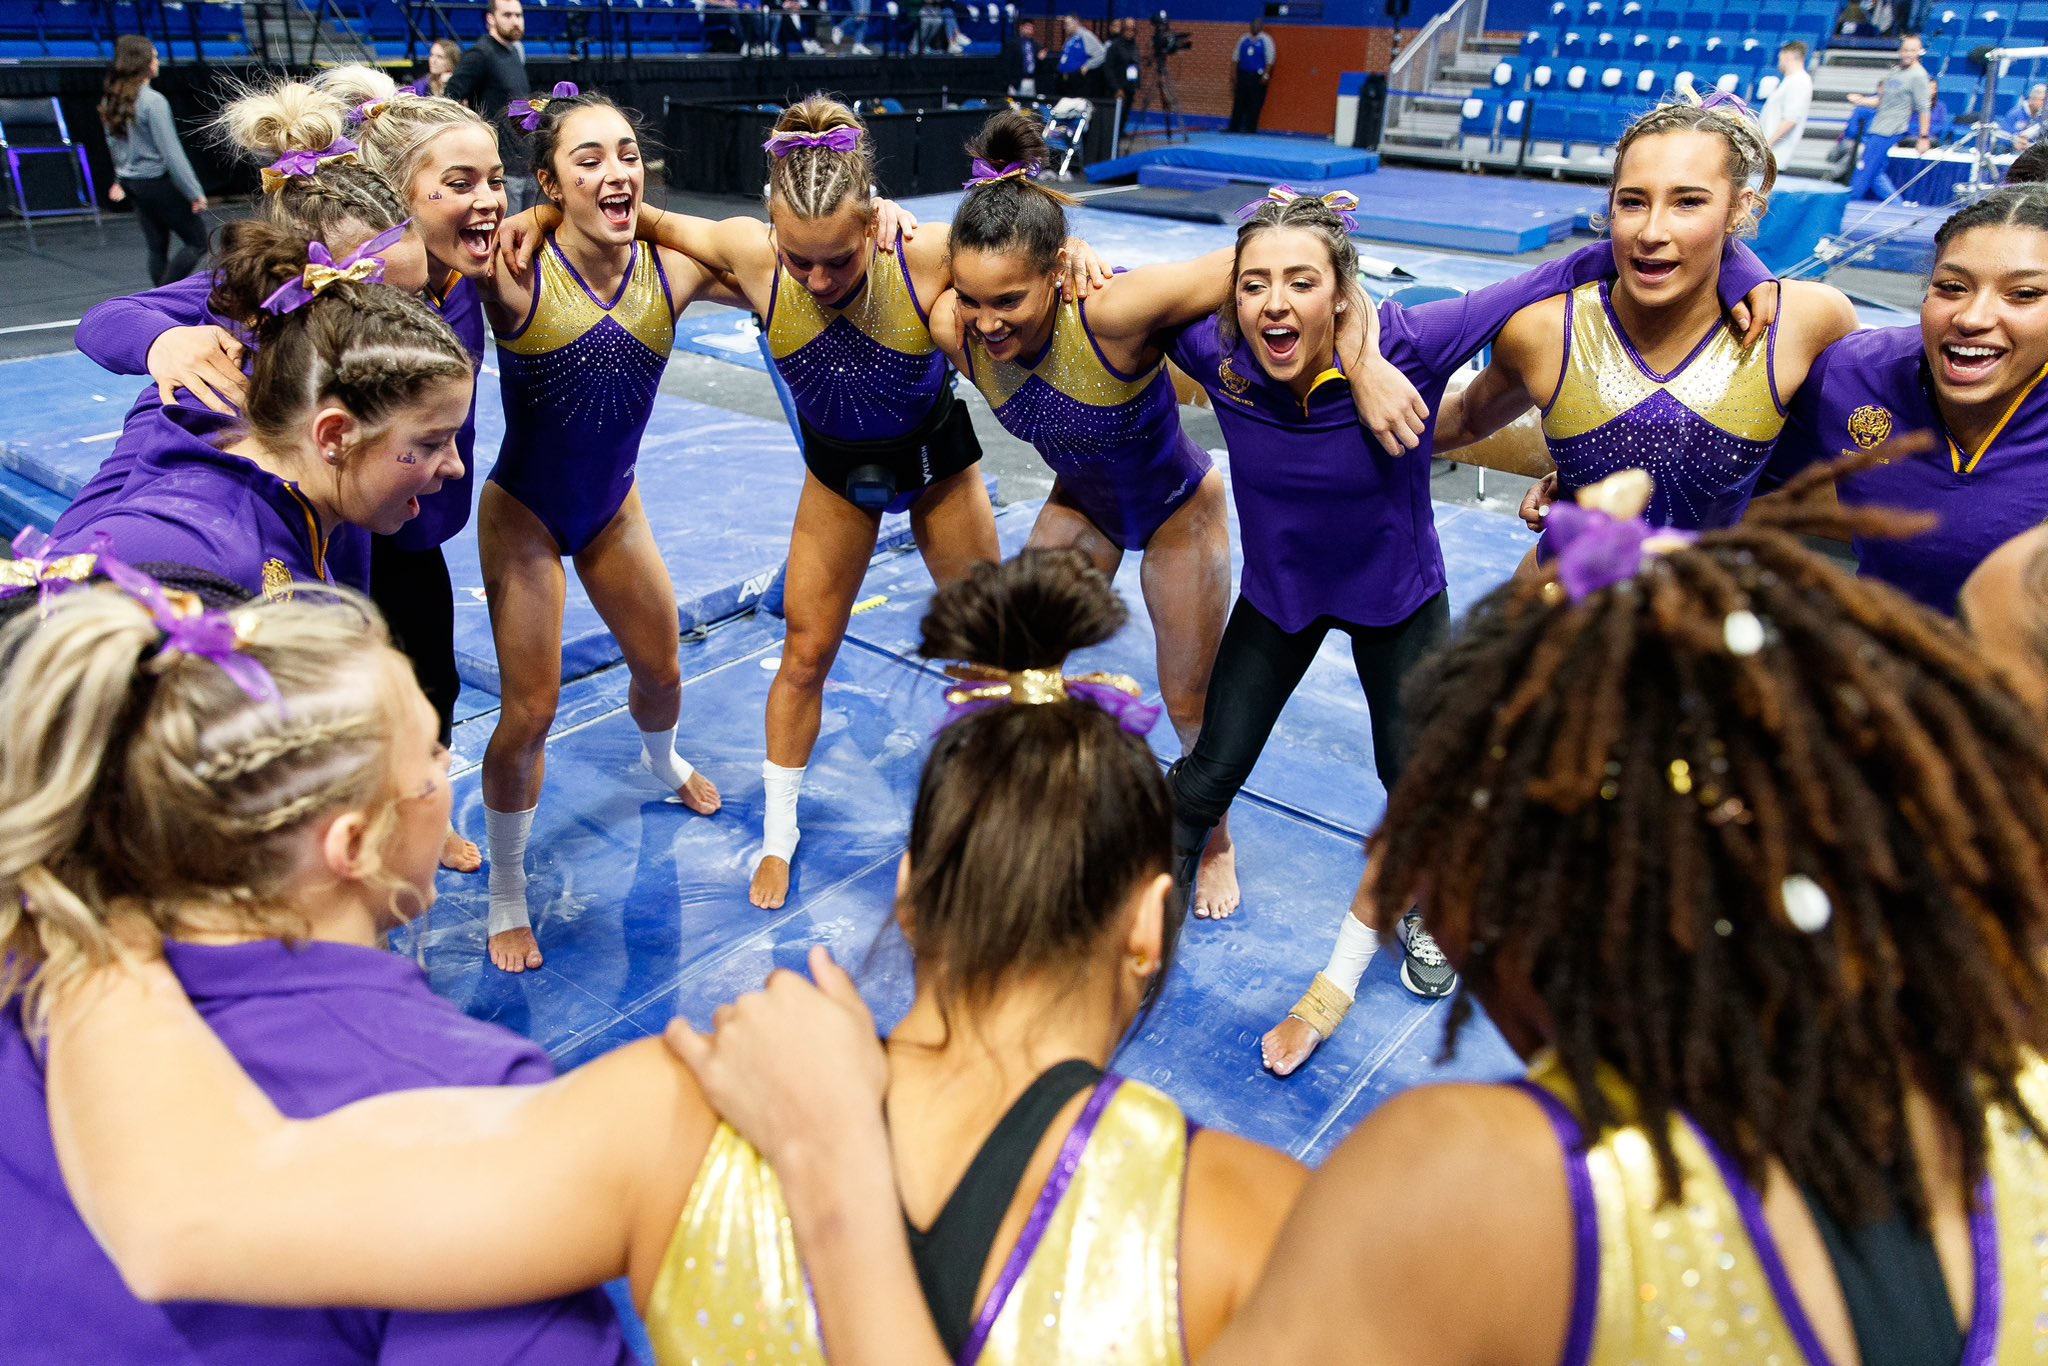 LSU gymnasts stand in a huddle warm-up leotards prior to their meet against Kentucky in Rupp Arena